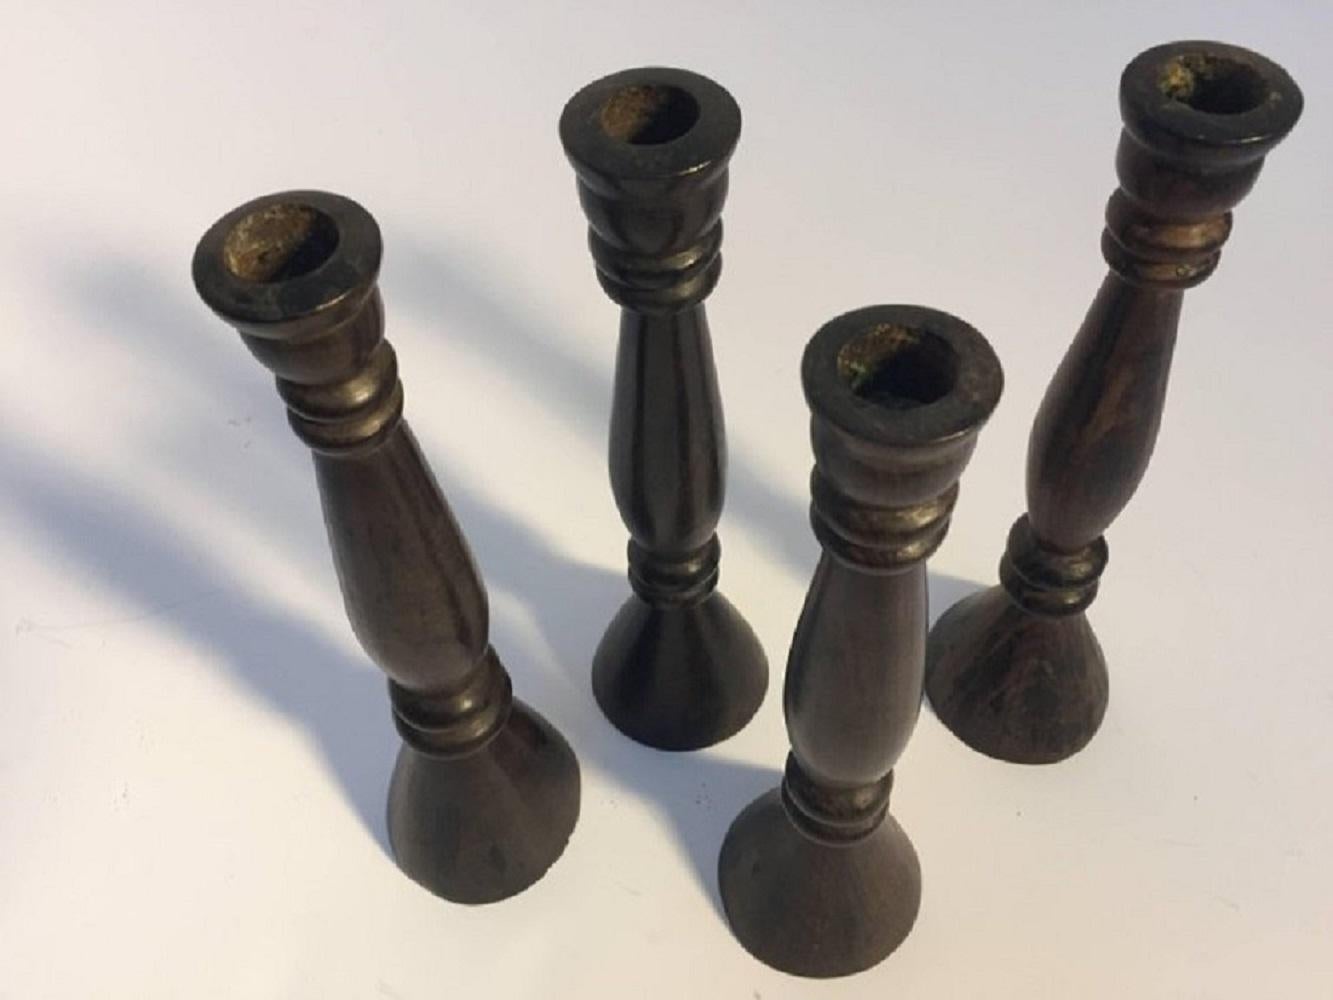 A sculptural set of four candlesticks hand-turned in ebonized wood, each in an elongated form, two slightly shorter than the other. Midcentury hand-carved heavy candlestick made in India for the British market.Dimensions: 11.5 in. H x 3.25 in. D.